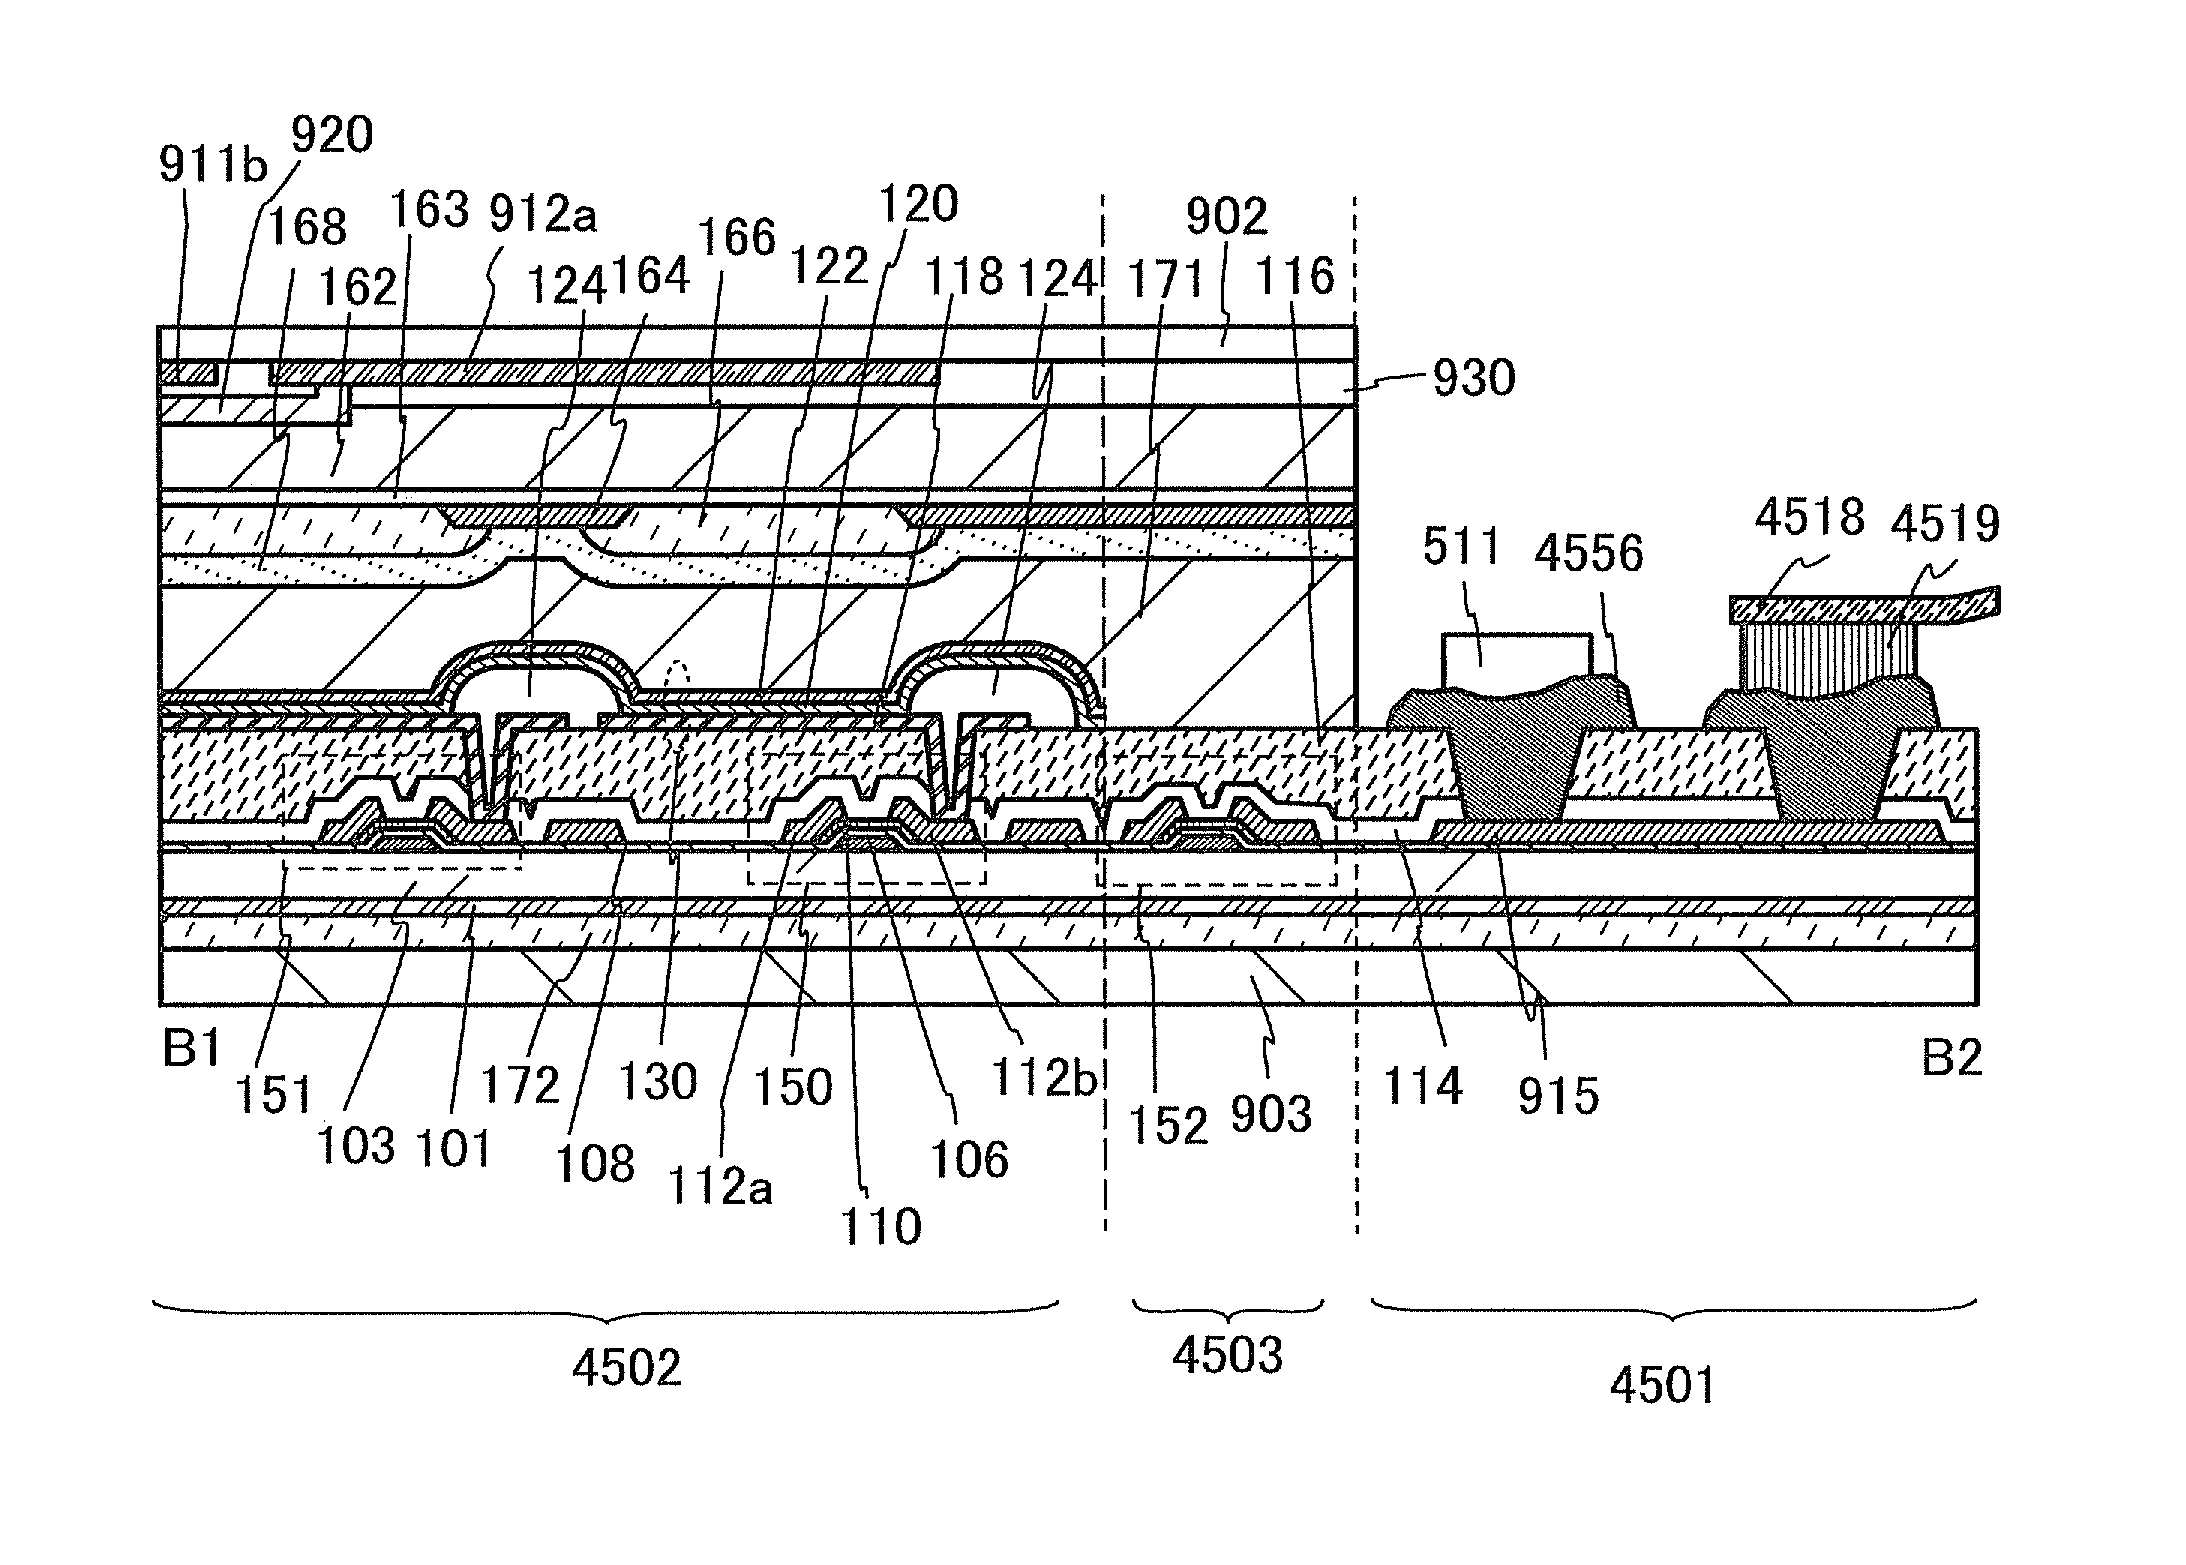 Light-emitting device and method for fabricating the same